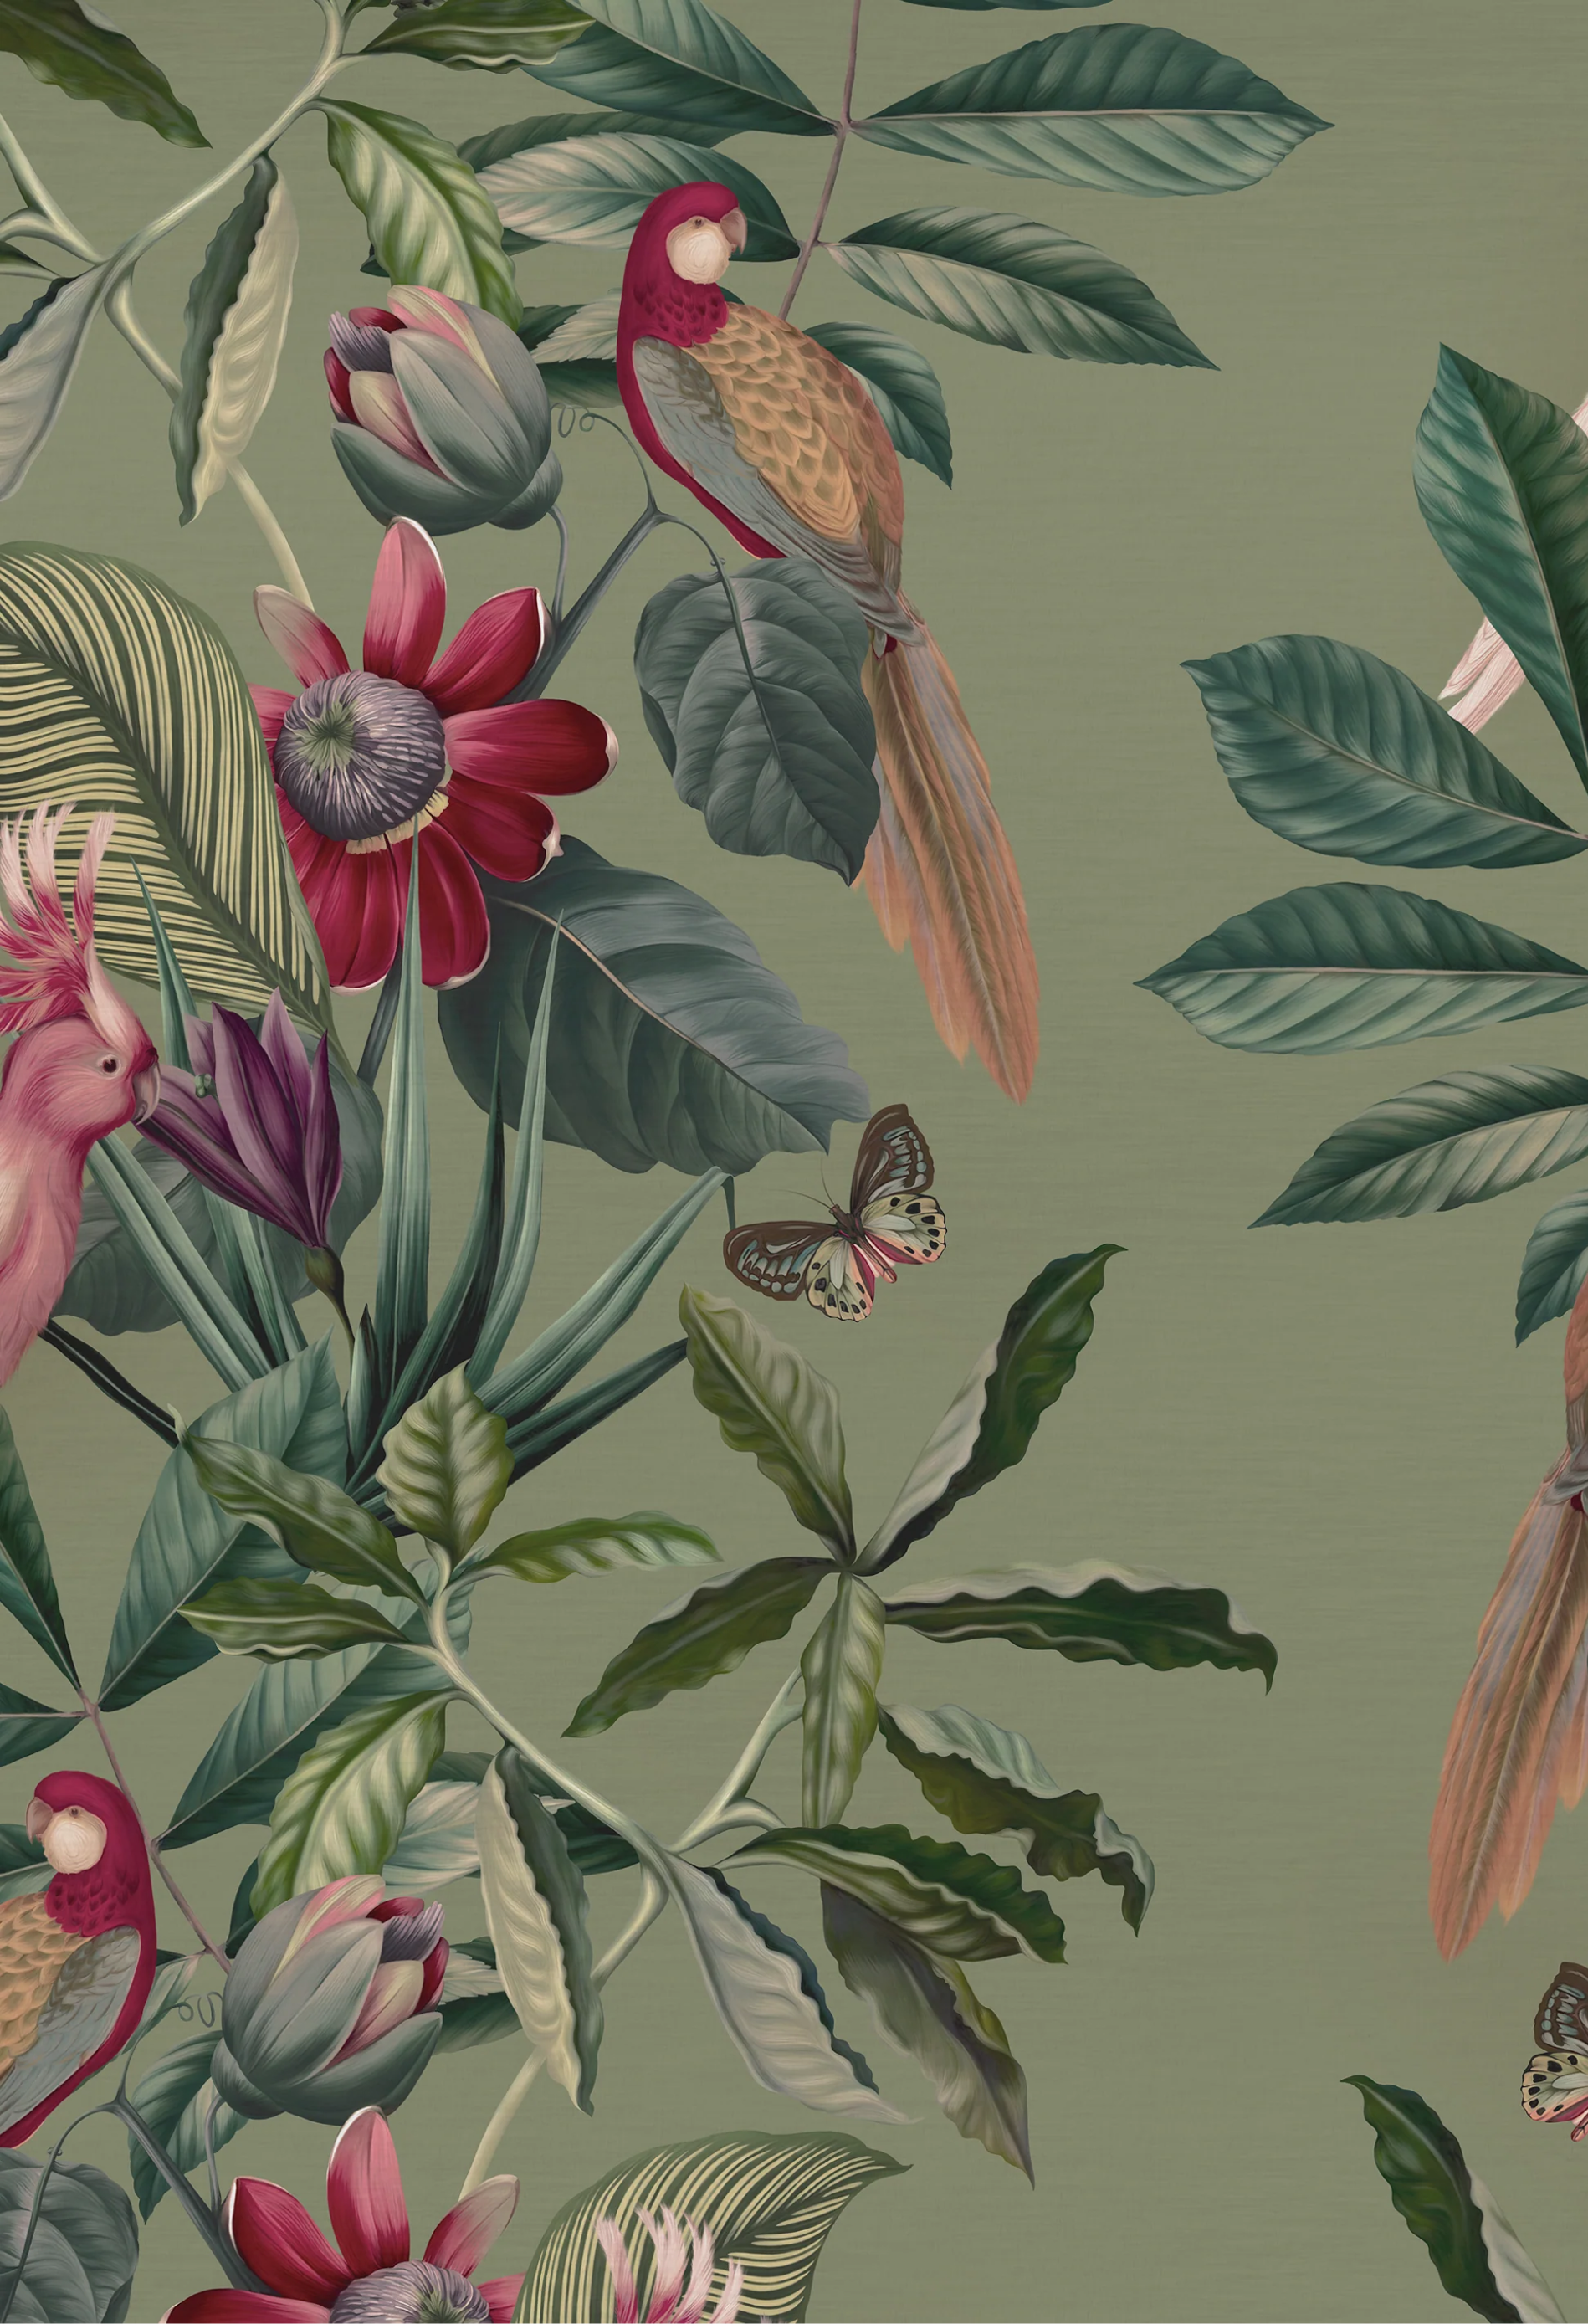 Illustration of birds tropical flowers and leaves by Deus ex Gardenia's Passiflora in Sage wallpaper.